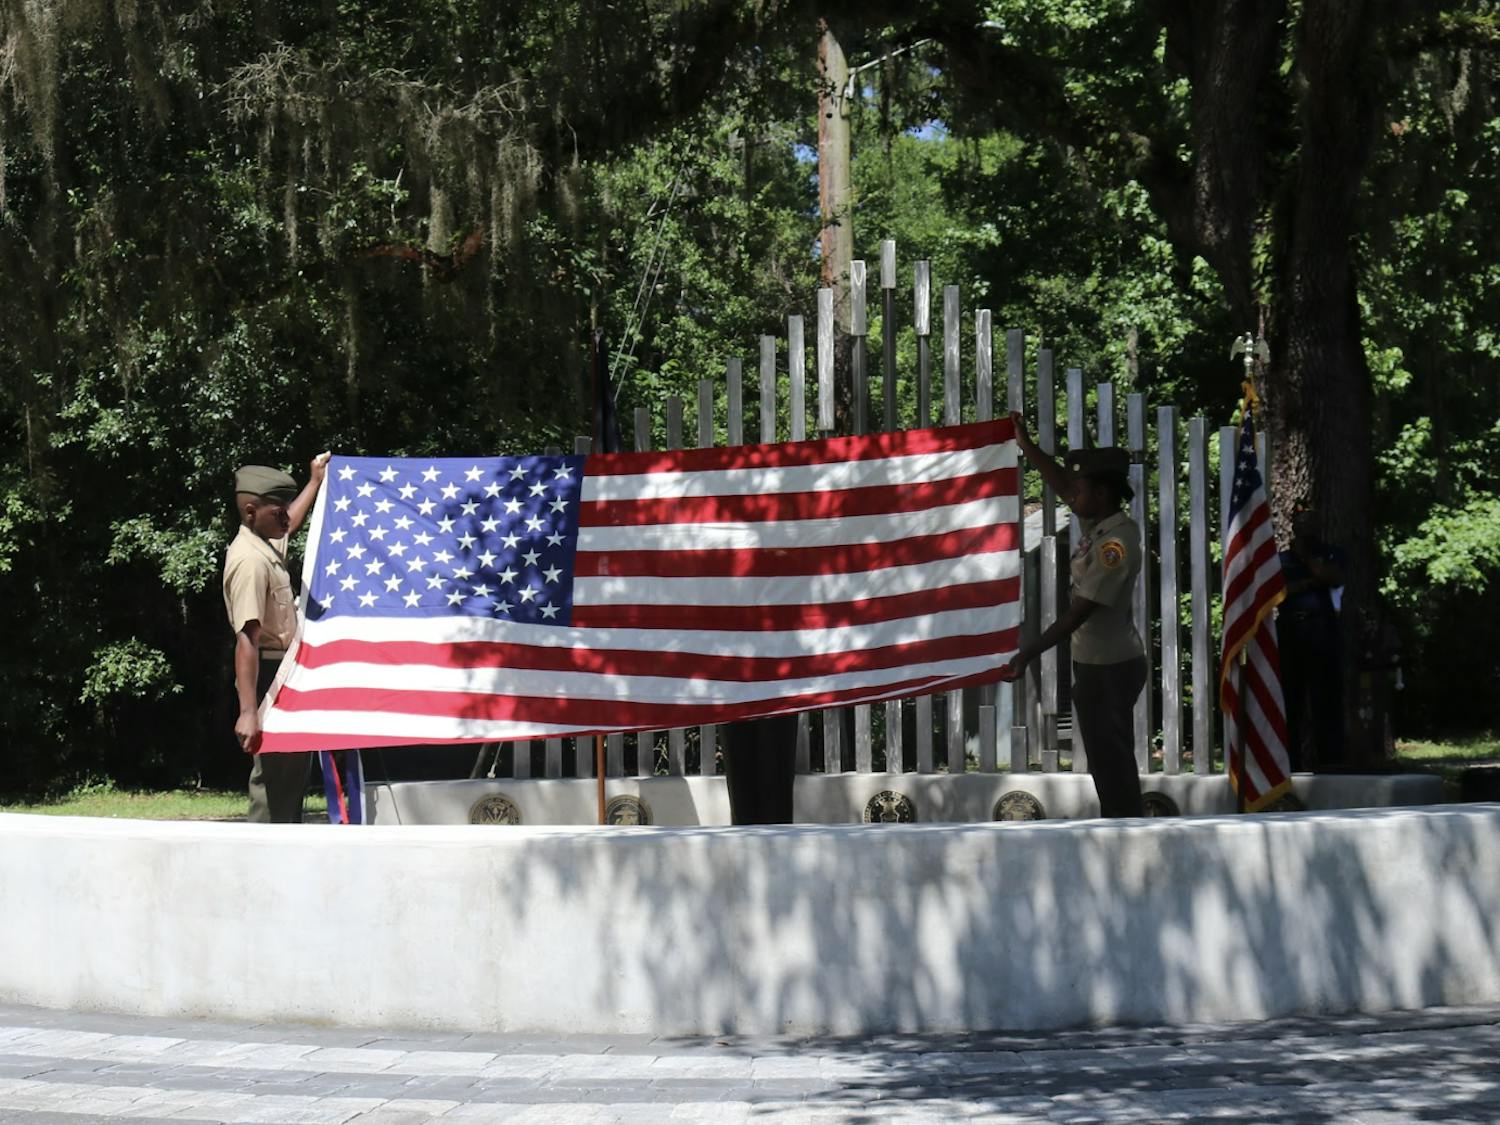 Milton Lewis Young Marines conducts the flag ceremony on Memorial Day at the Evergreen Cemetery May 30, 2022.